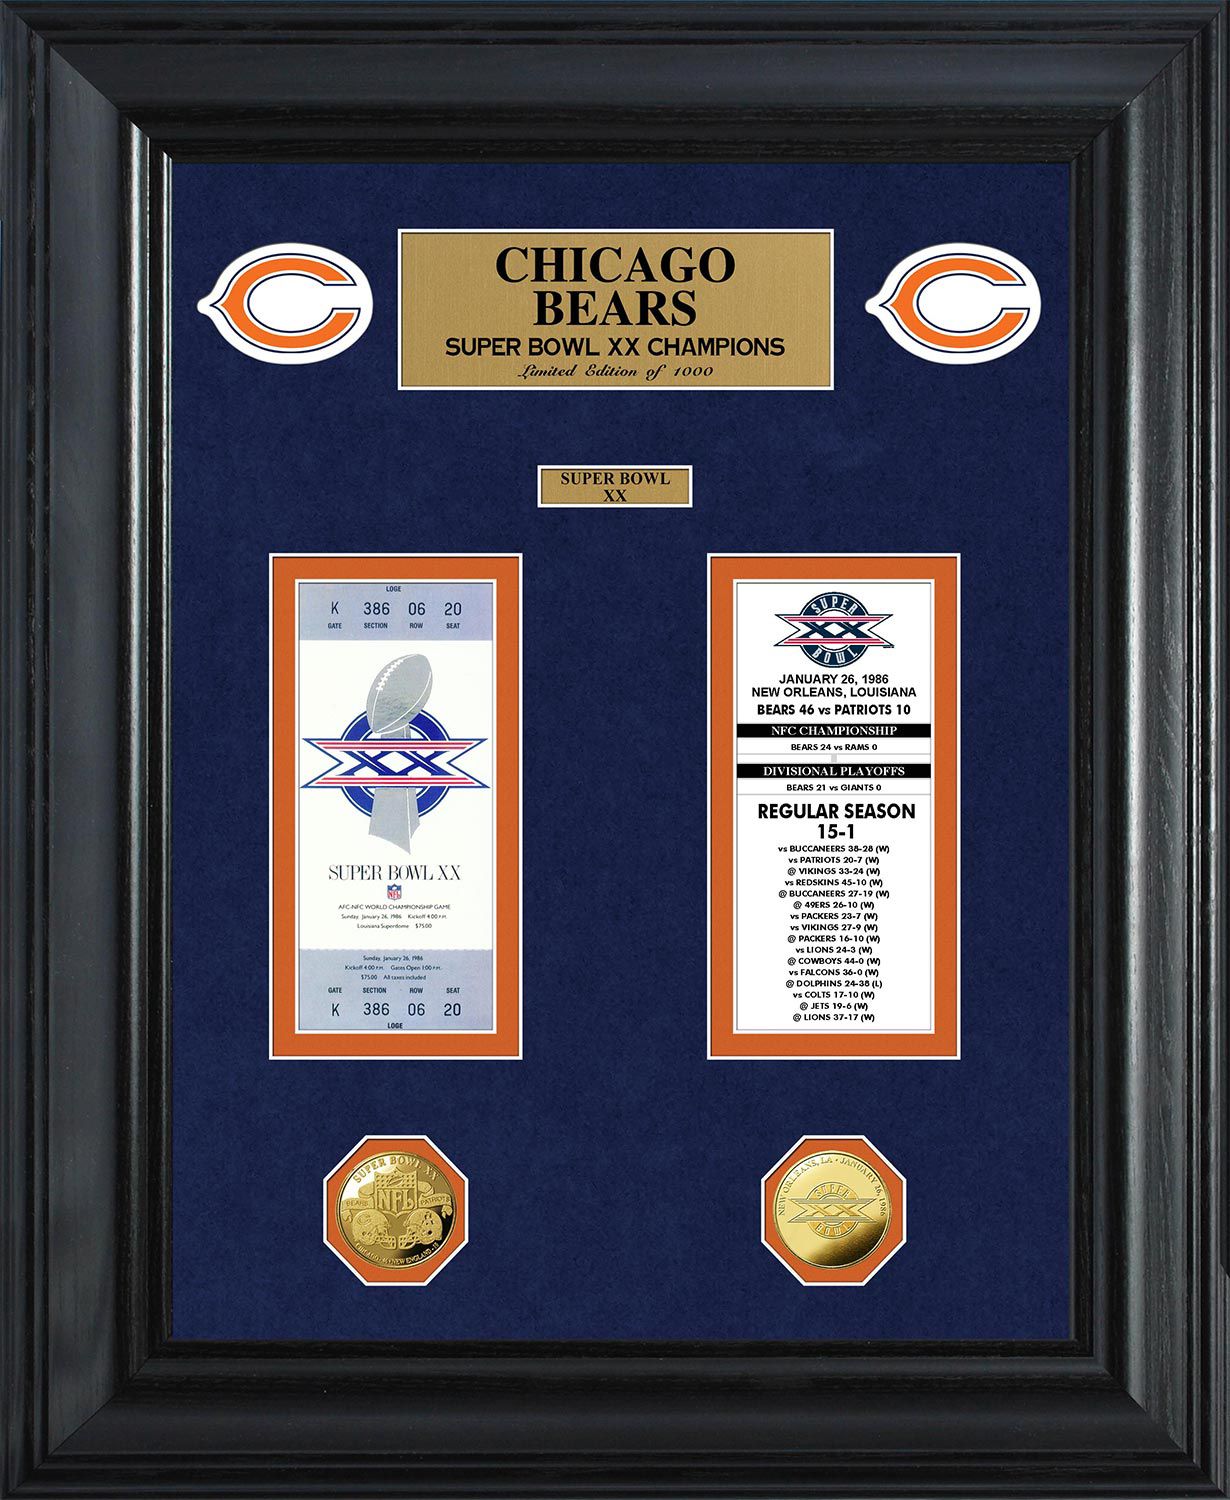 The Highland Mint Chicago Bears Super Bowl Ticket and Coin Collection